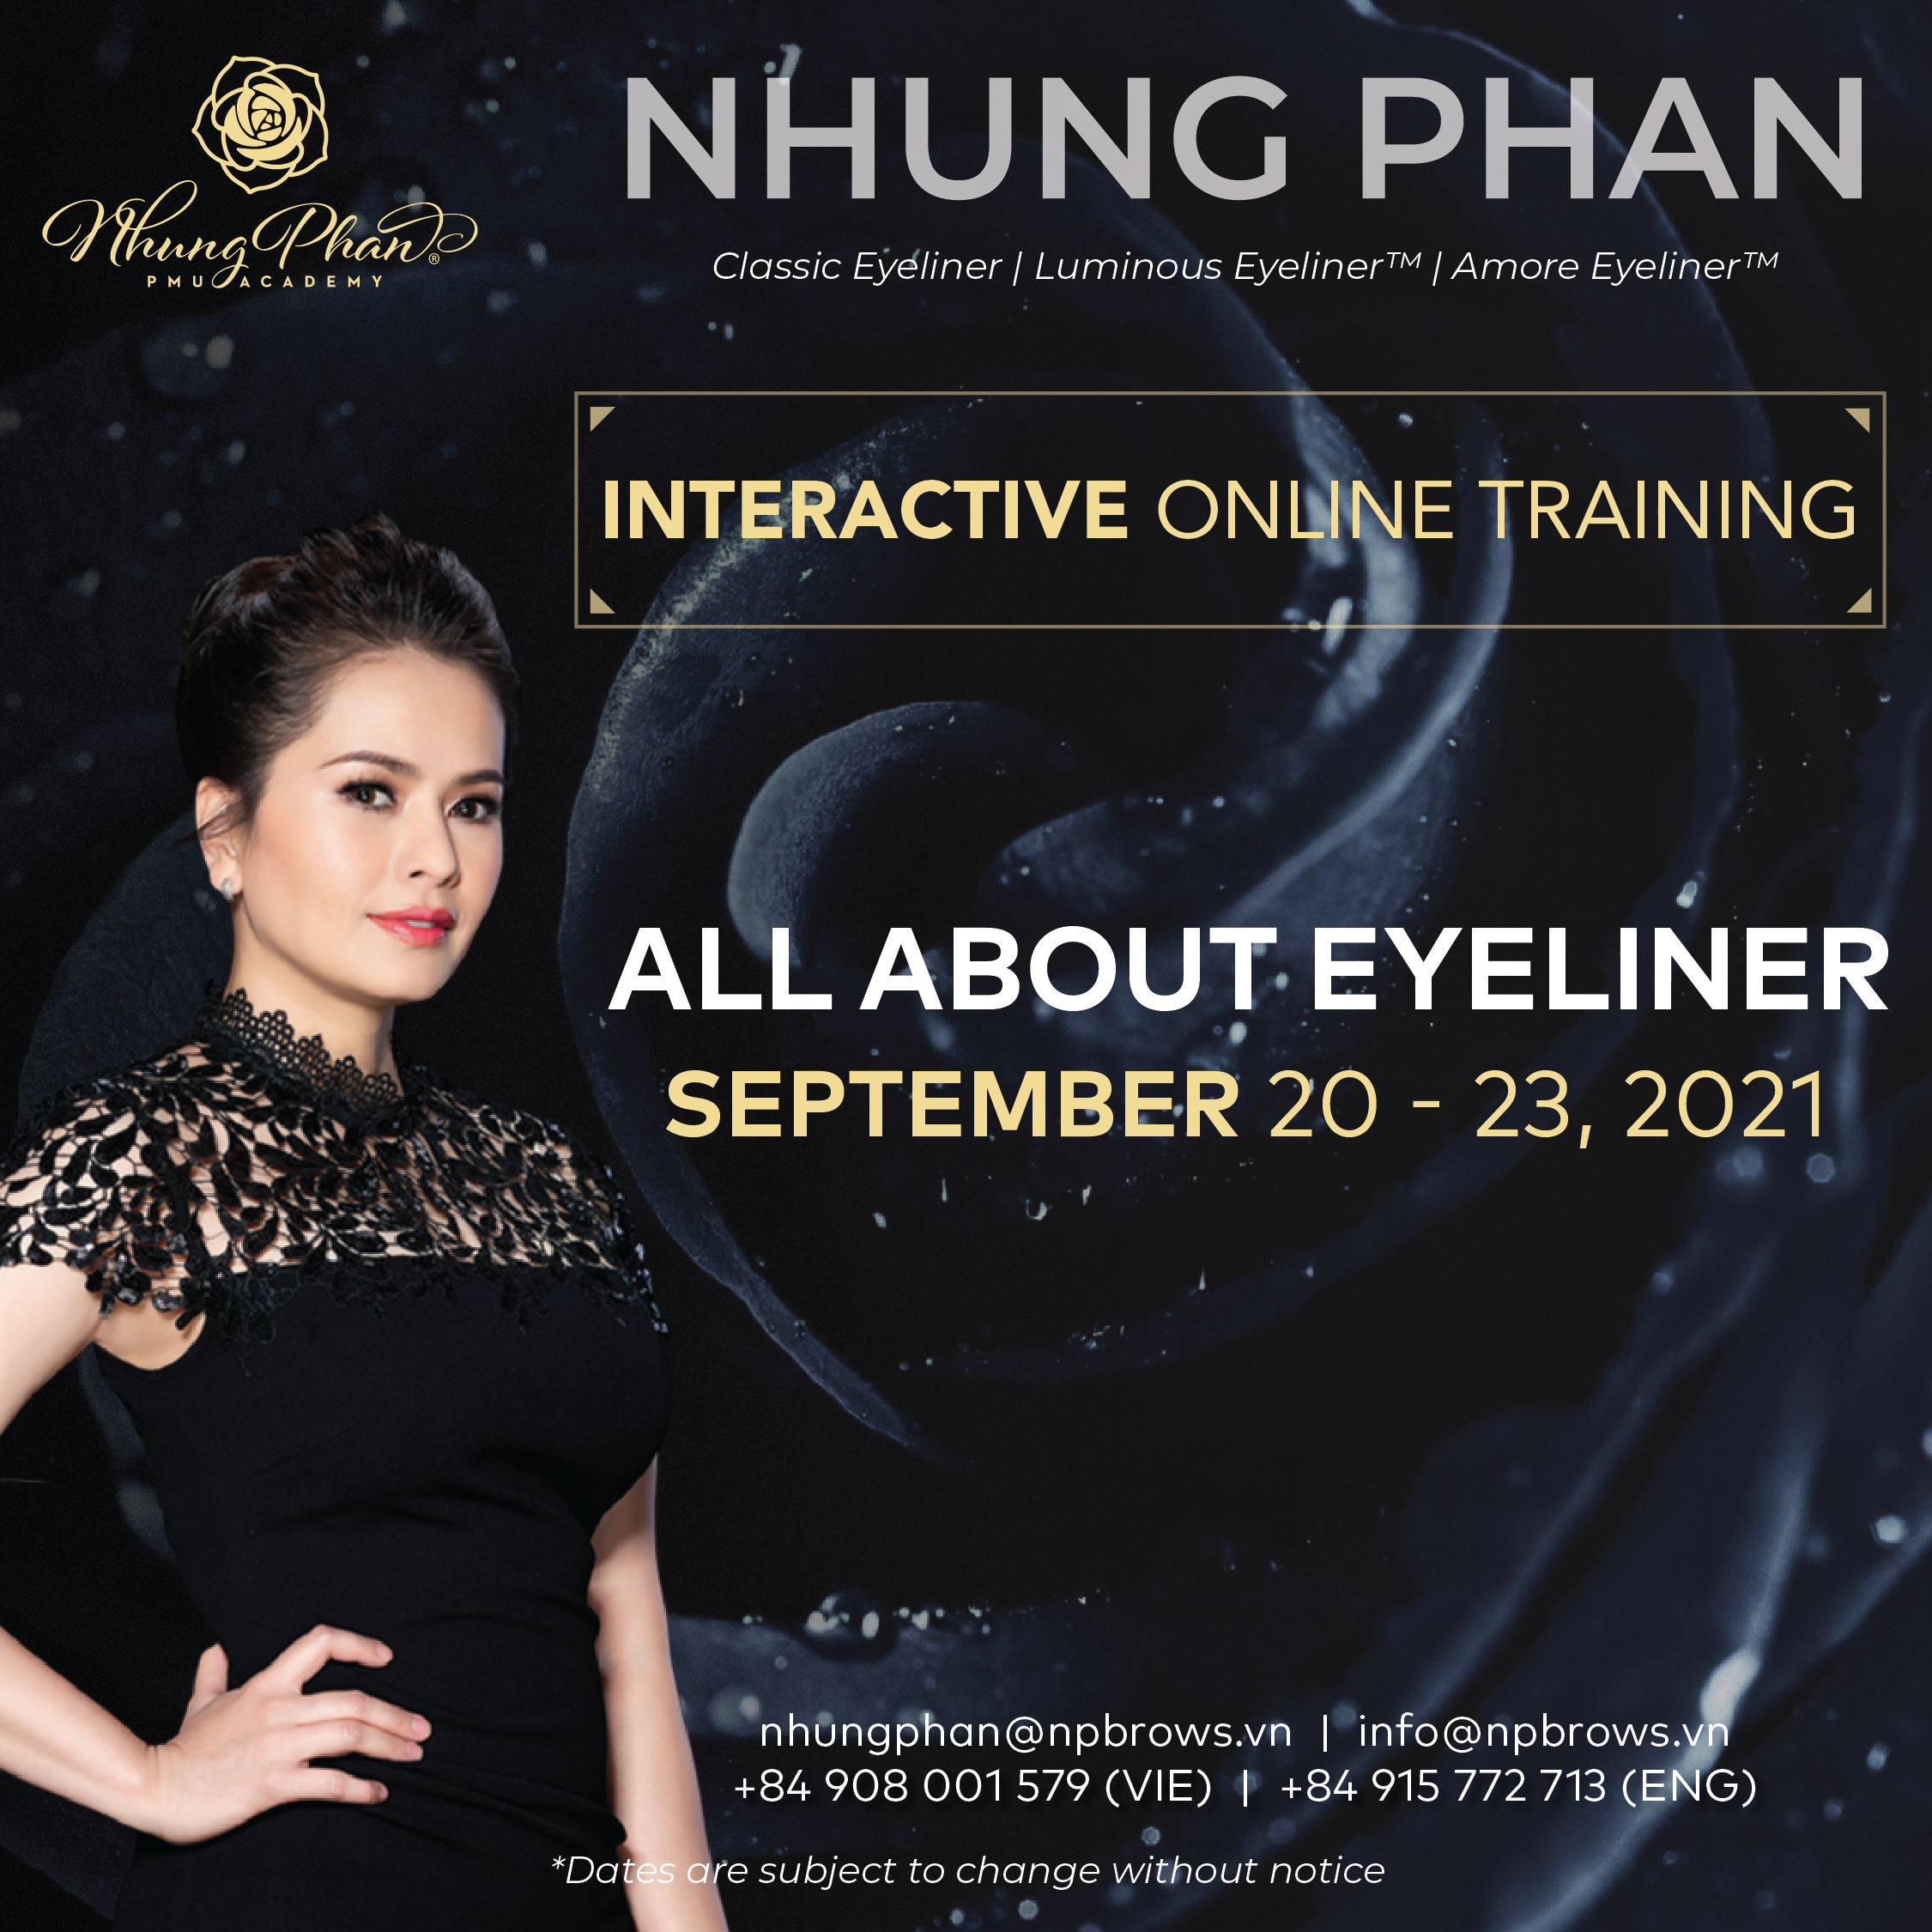 ALL ABOUT EYELINER - INTERACTIVE ONLINE TRAINING 20 - 23/09/2021 (KIT included)